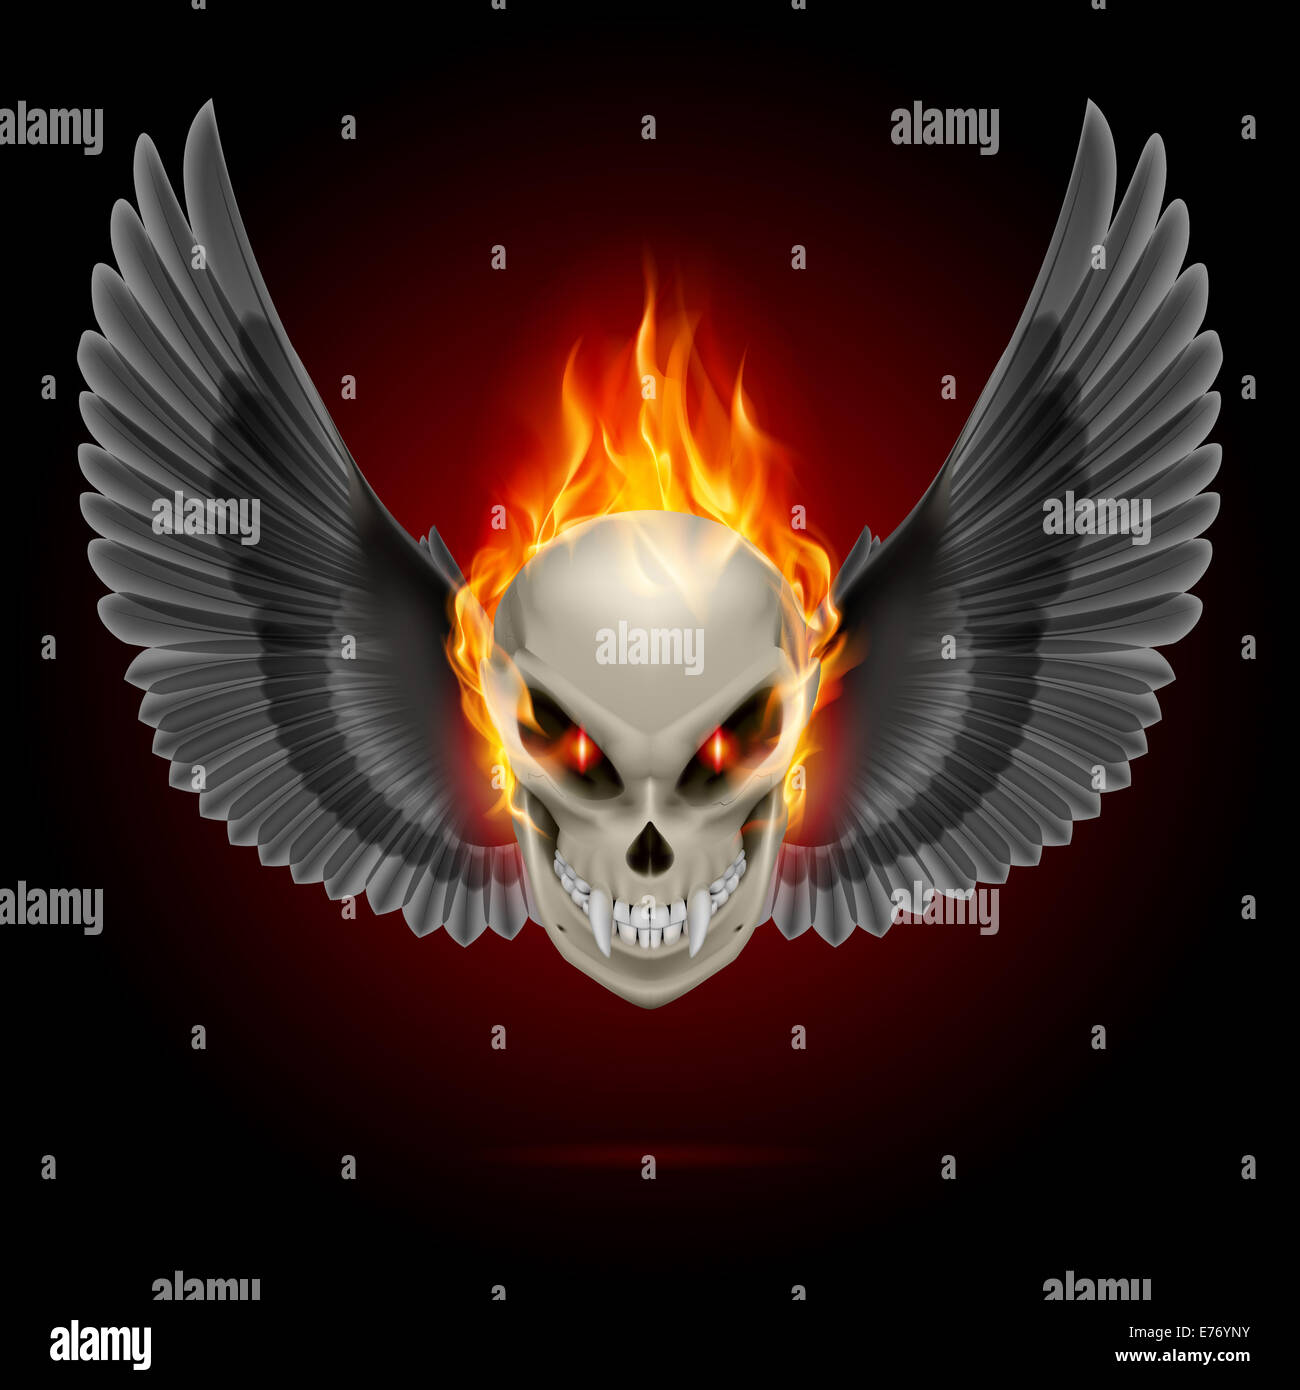 Mutant skull with long fangs, orange flame and black wings Stock Photo